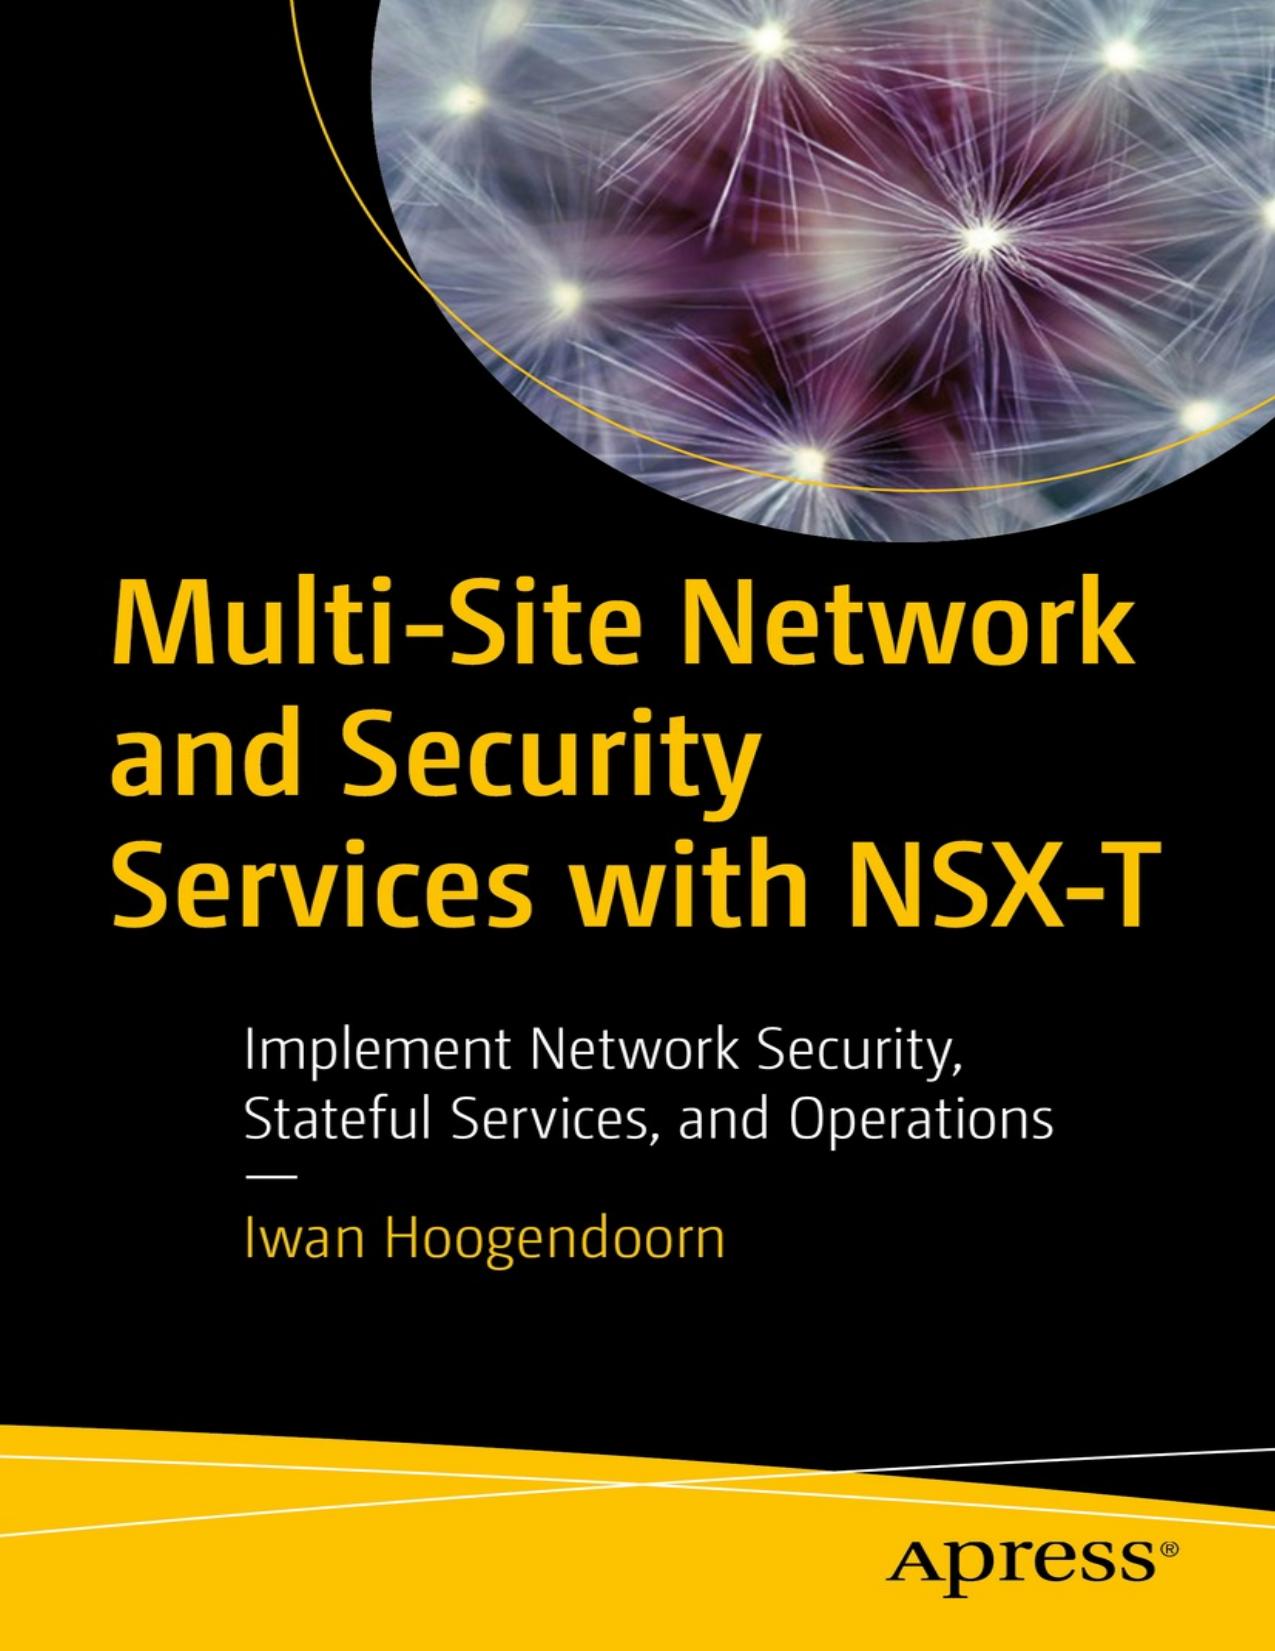 Multi-Site Network and Security Services with NSX-T - Implement Network Security, Stateful Services, and Operations (2021) by Apress